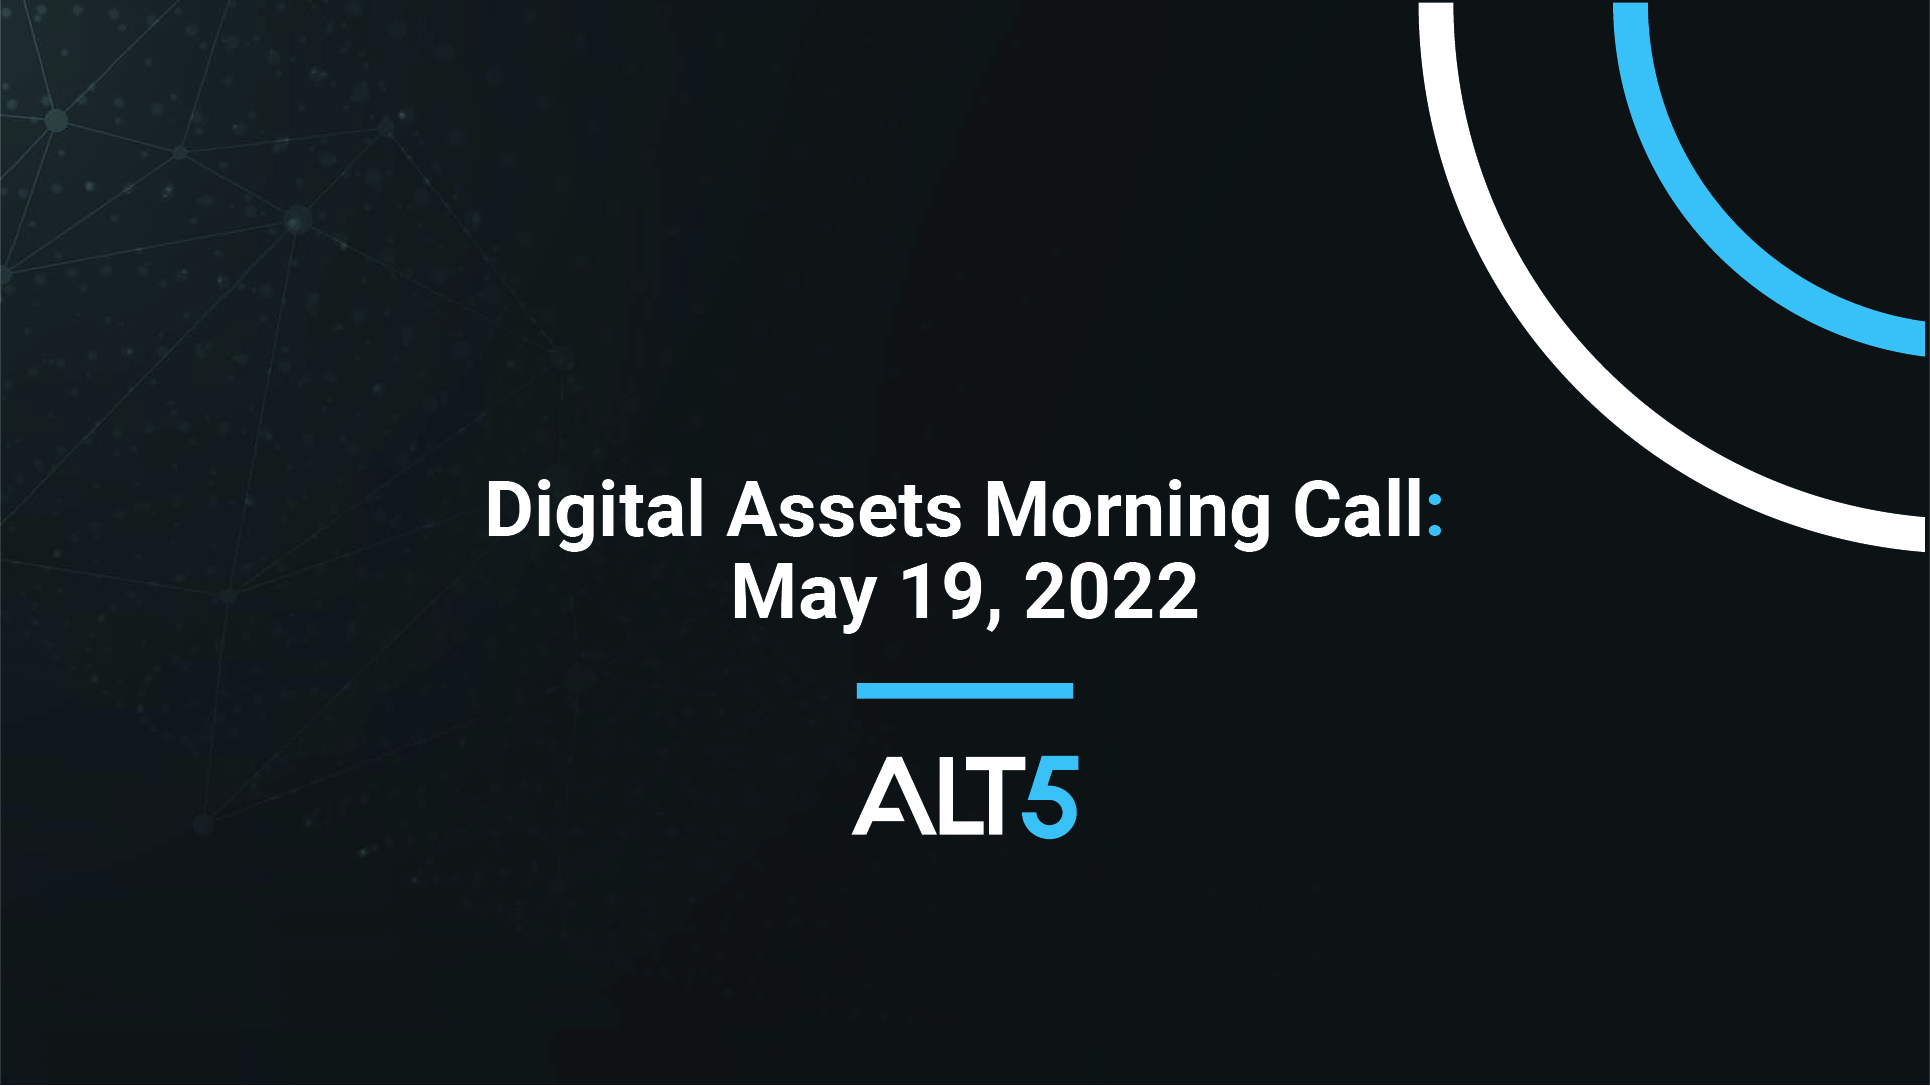 Digital Assets Morning Call: May 18 2022 - Major crypto assets consolidate amid broader equity market decline